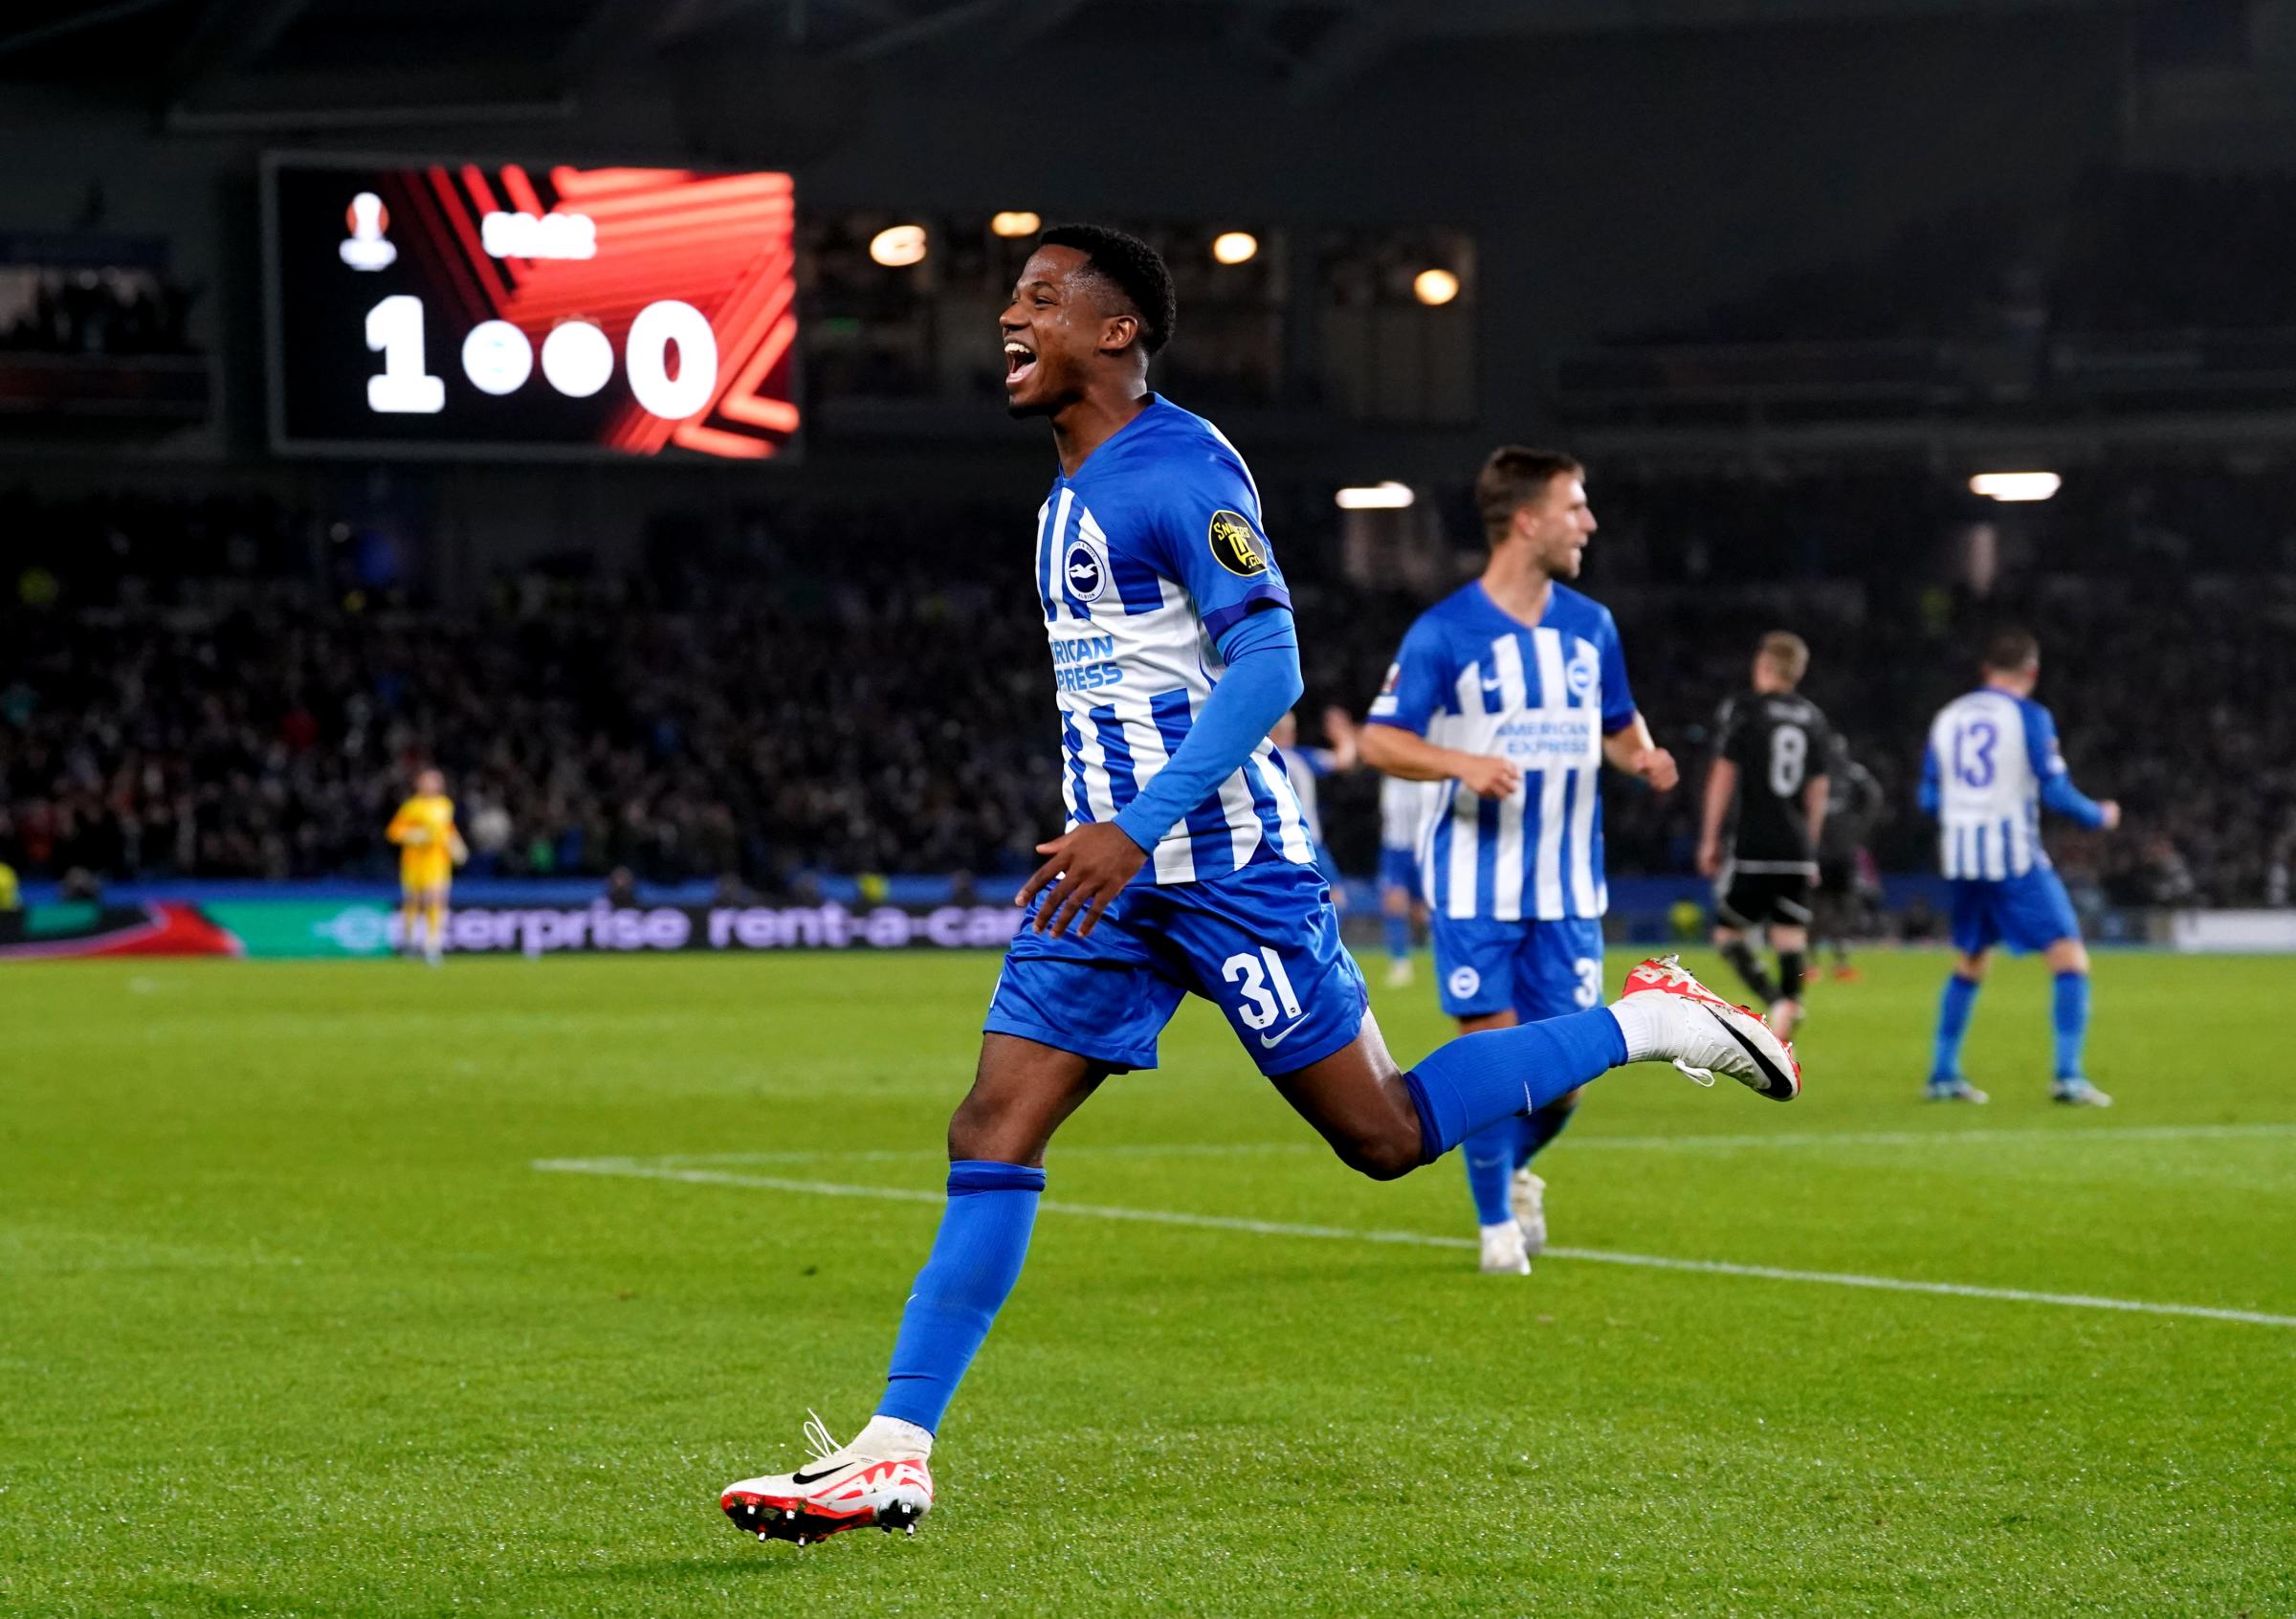 Europa League play-off round - what Brighton can look for